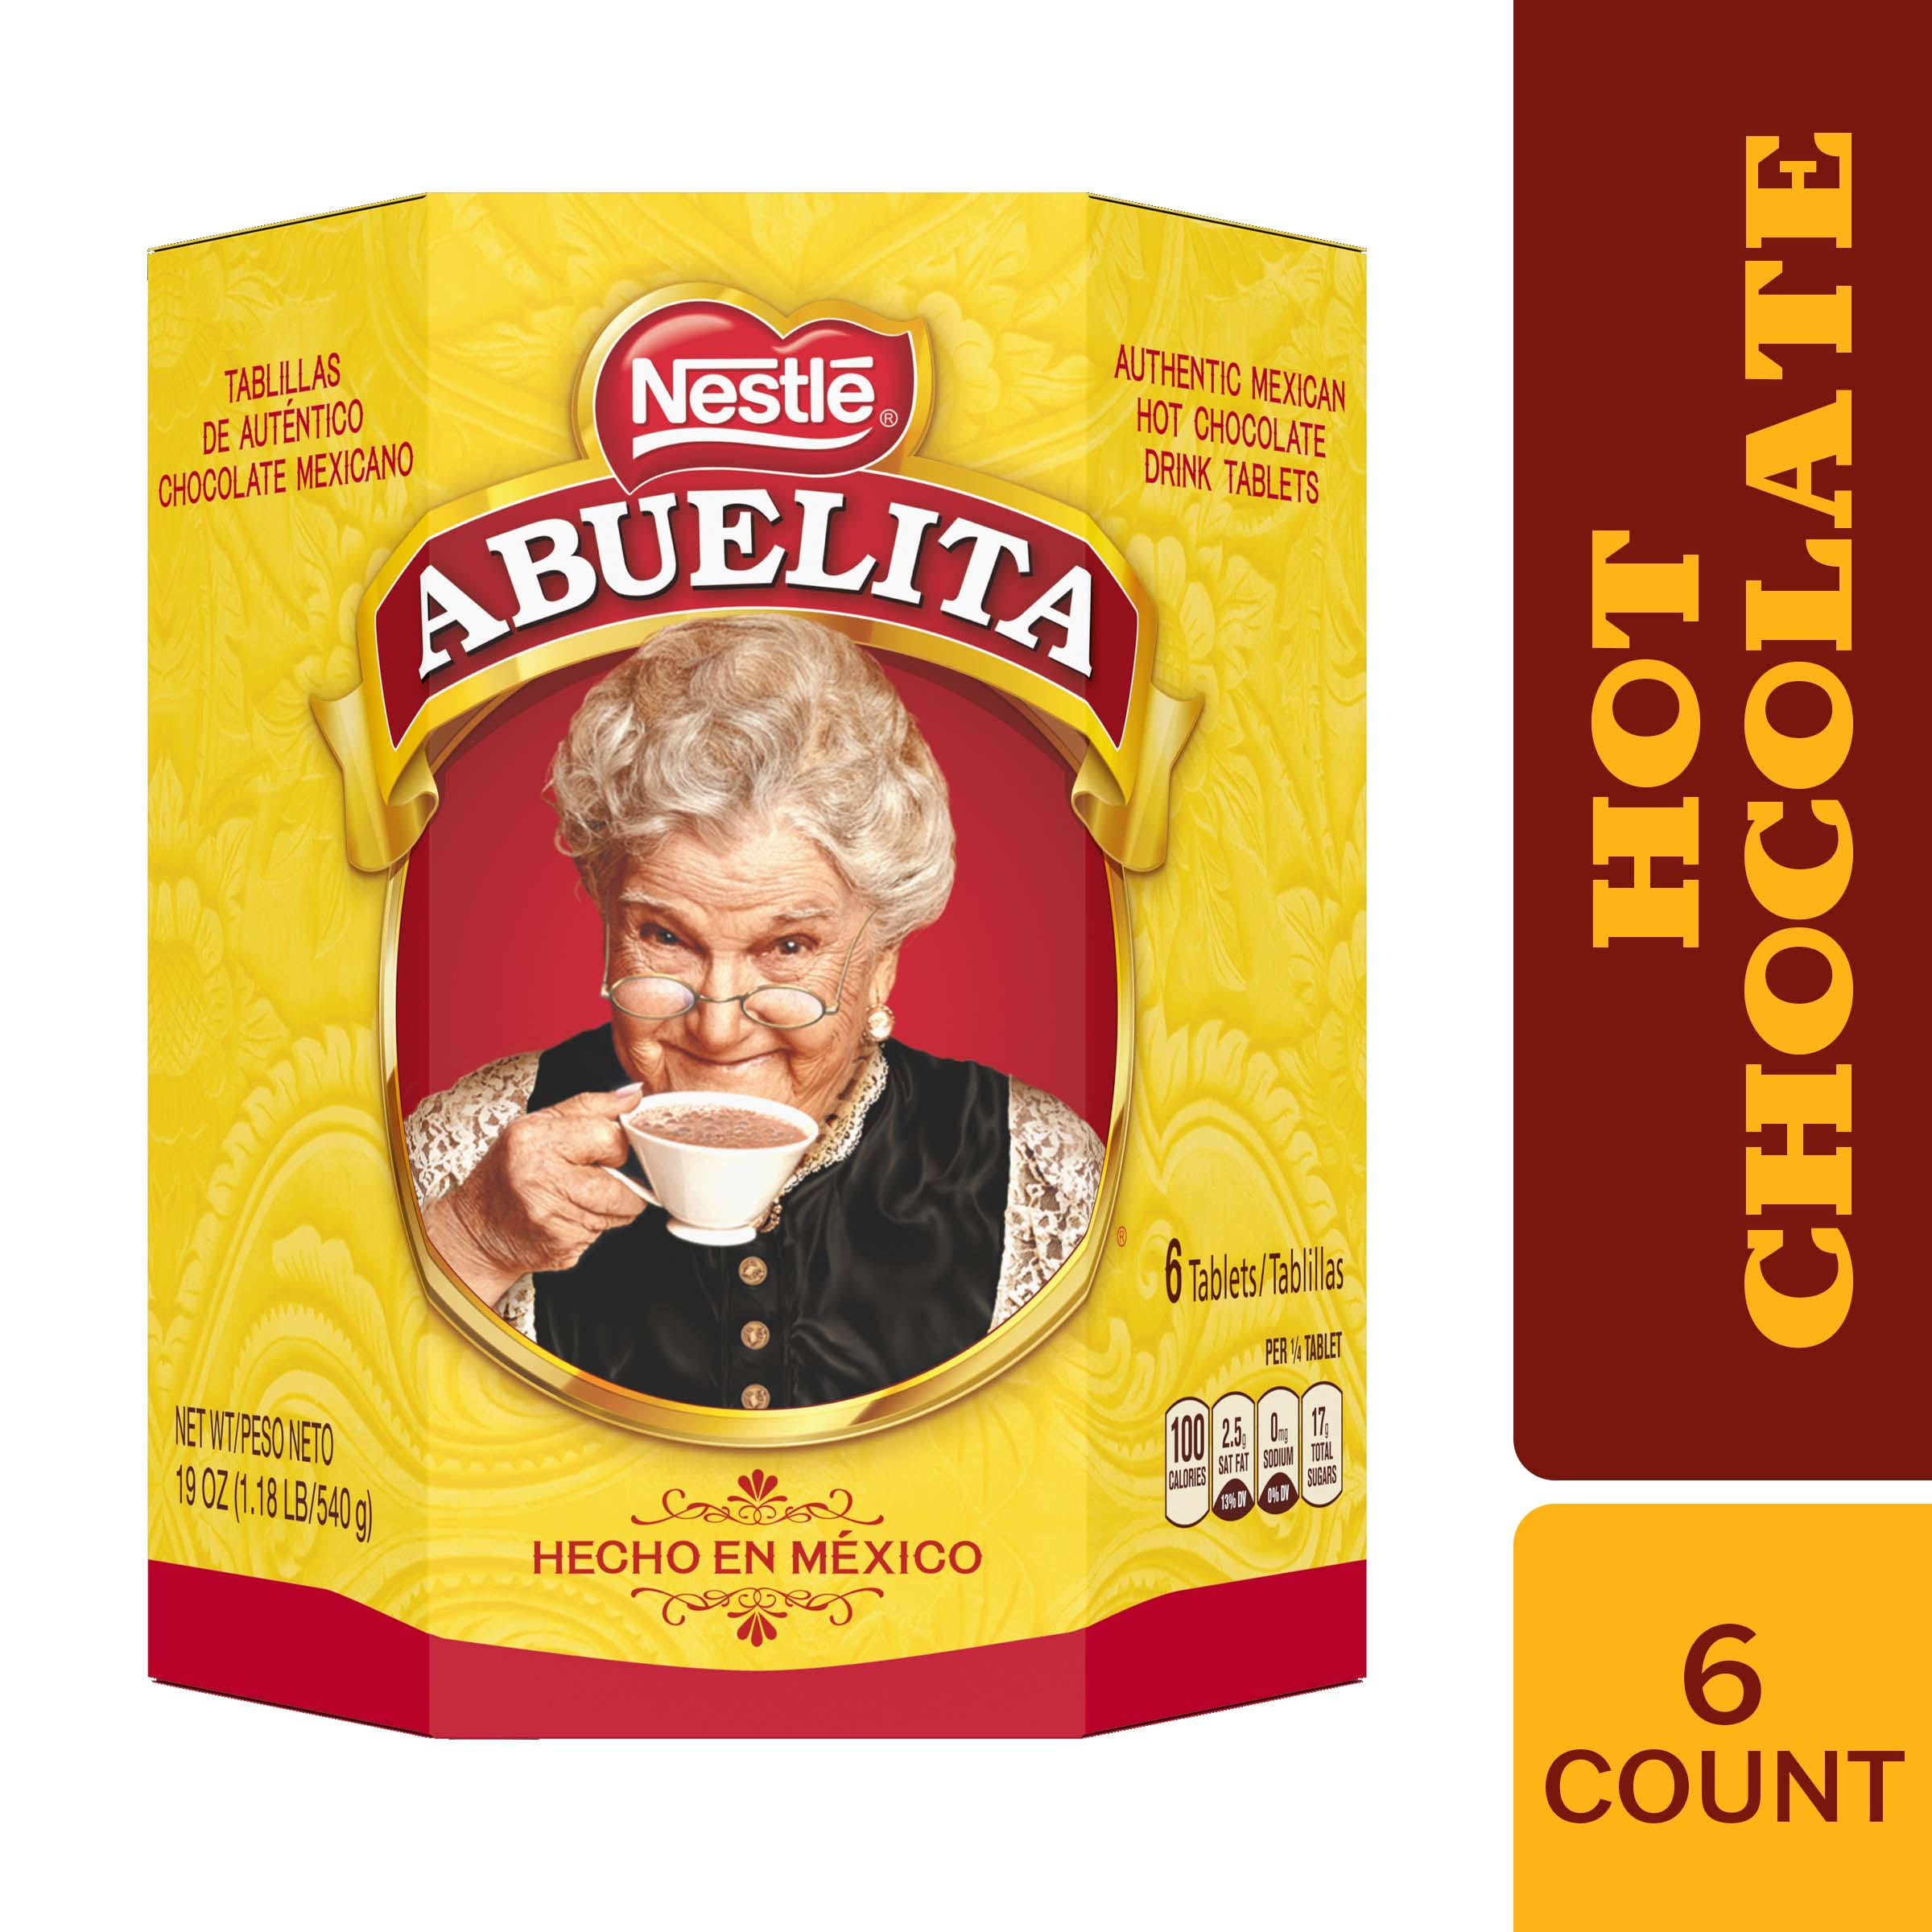 Nestlé Abuelita Authentic Mexican Hot Chocolate Drink Tablets - 6 x 19 oz Pack